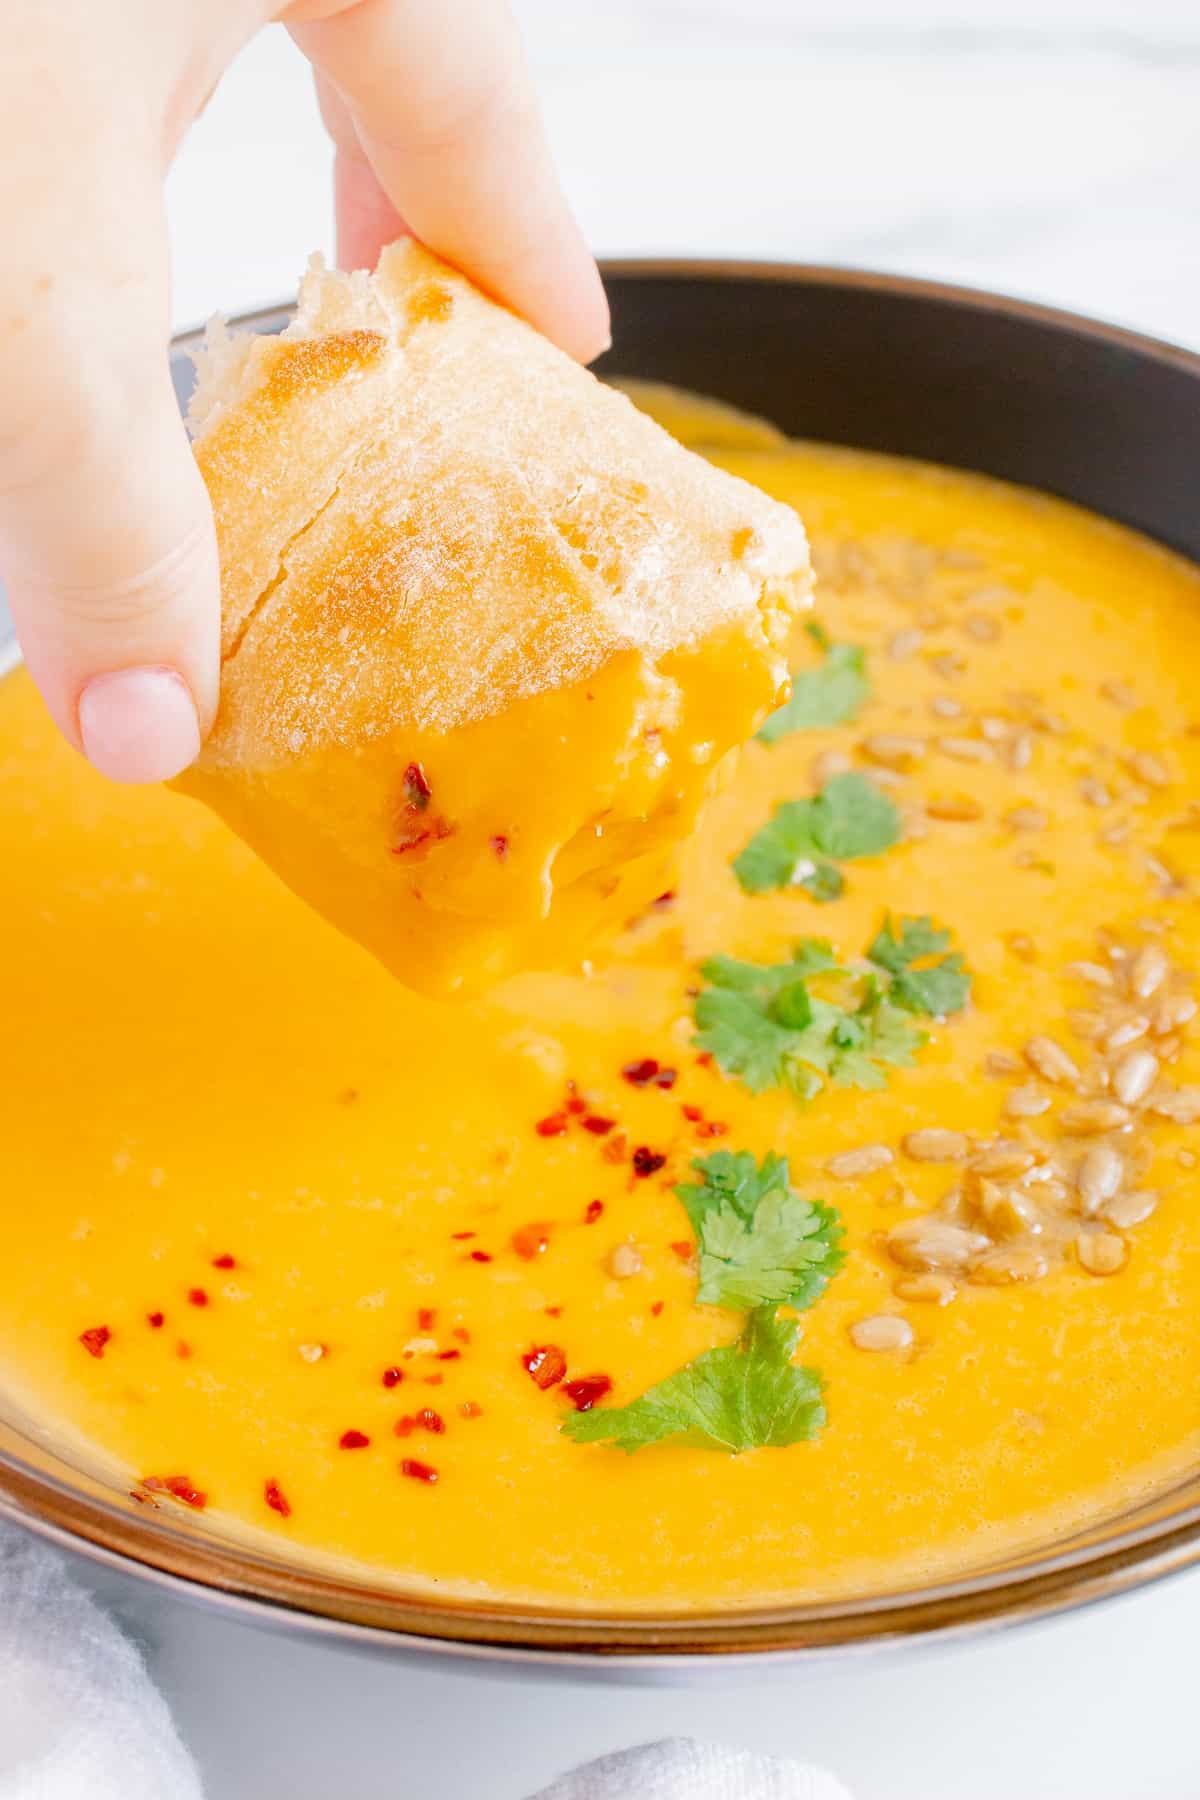 A woman dipping a piece of bread in butternut squash soup.